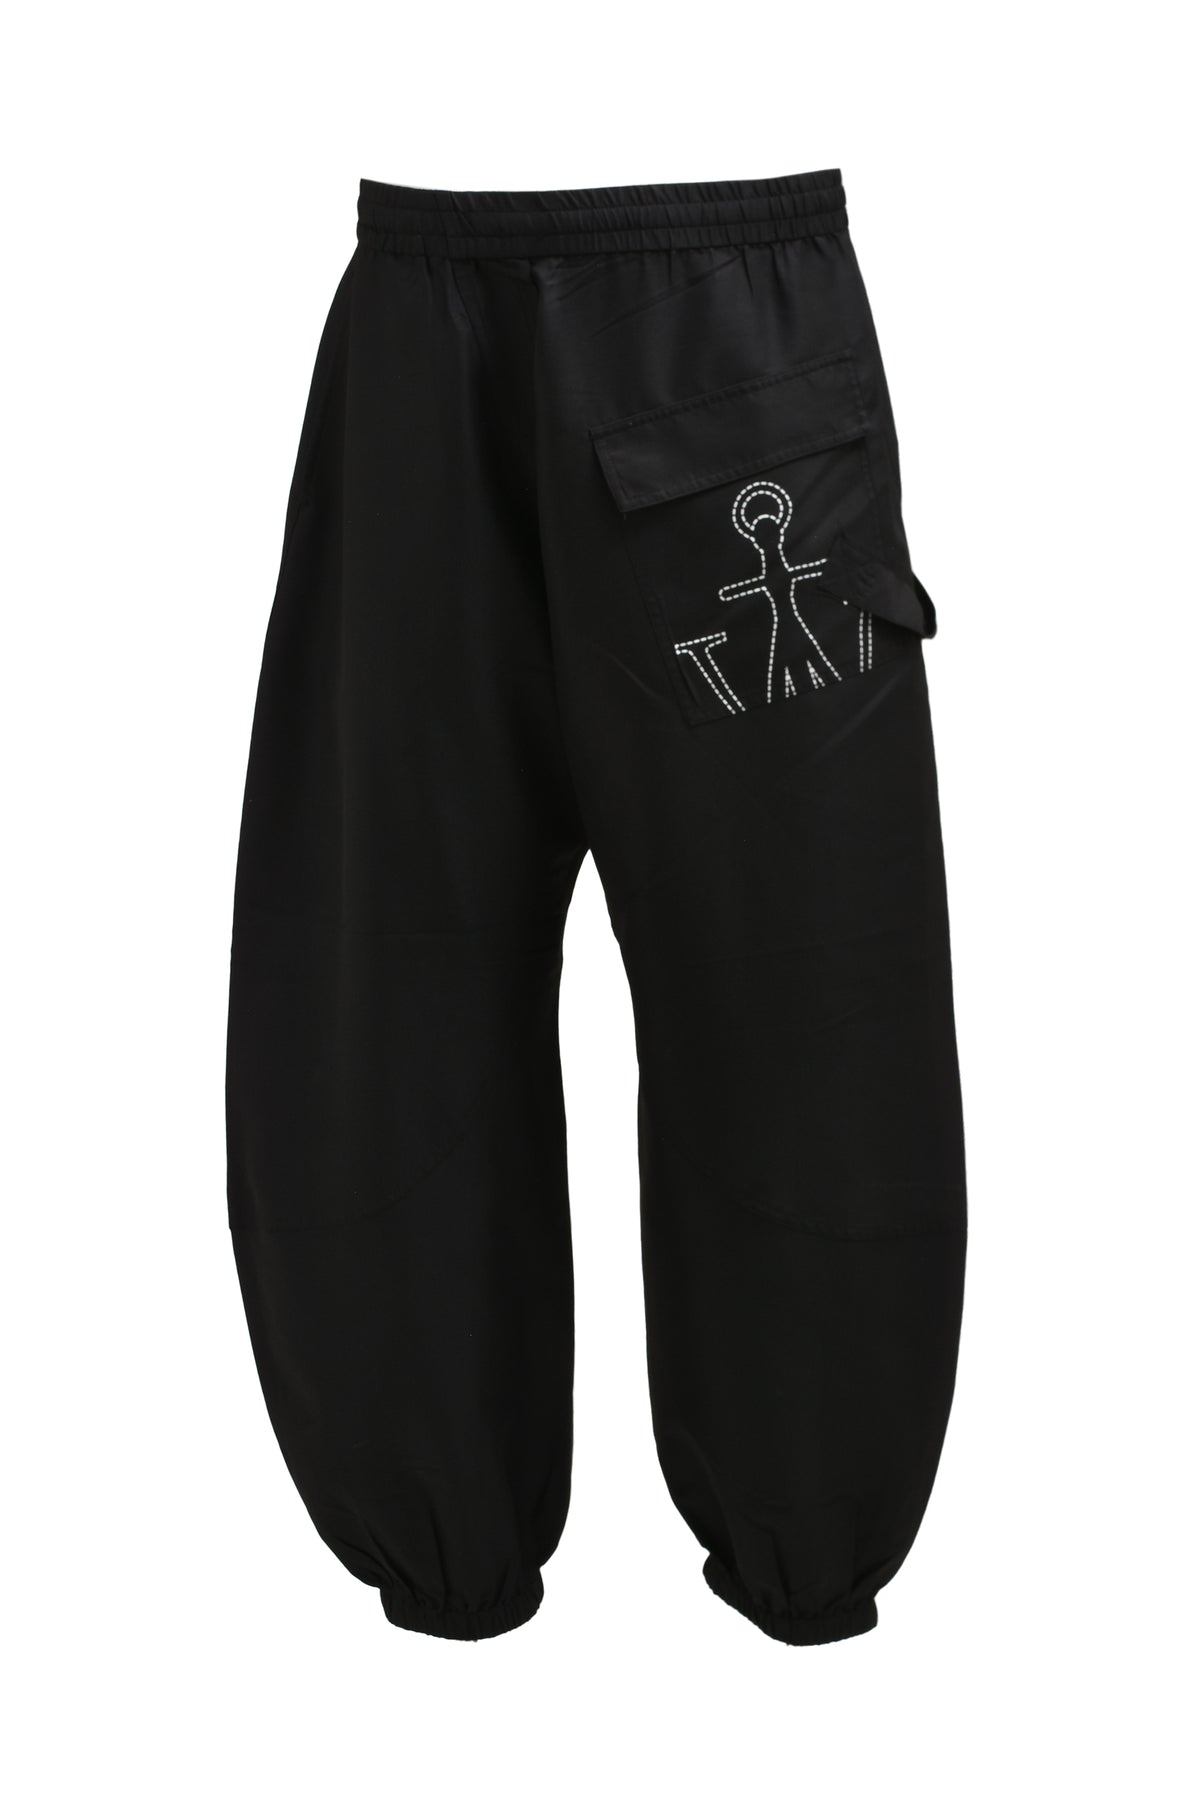 TWISTED JOGGERS / BLK